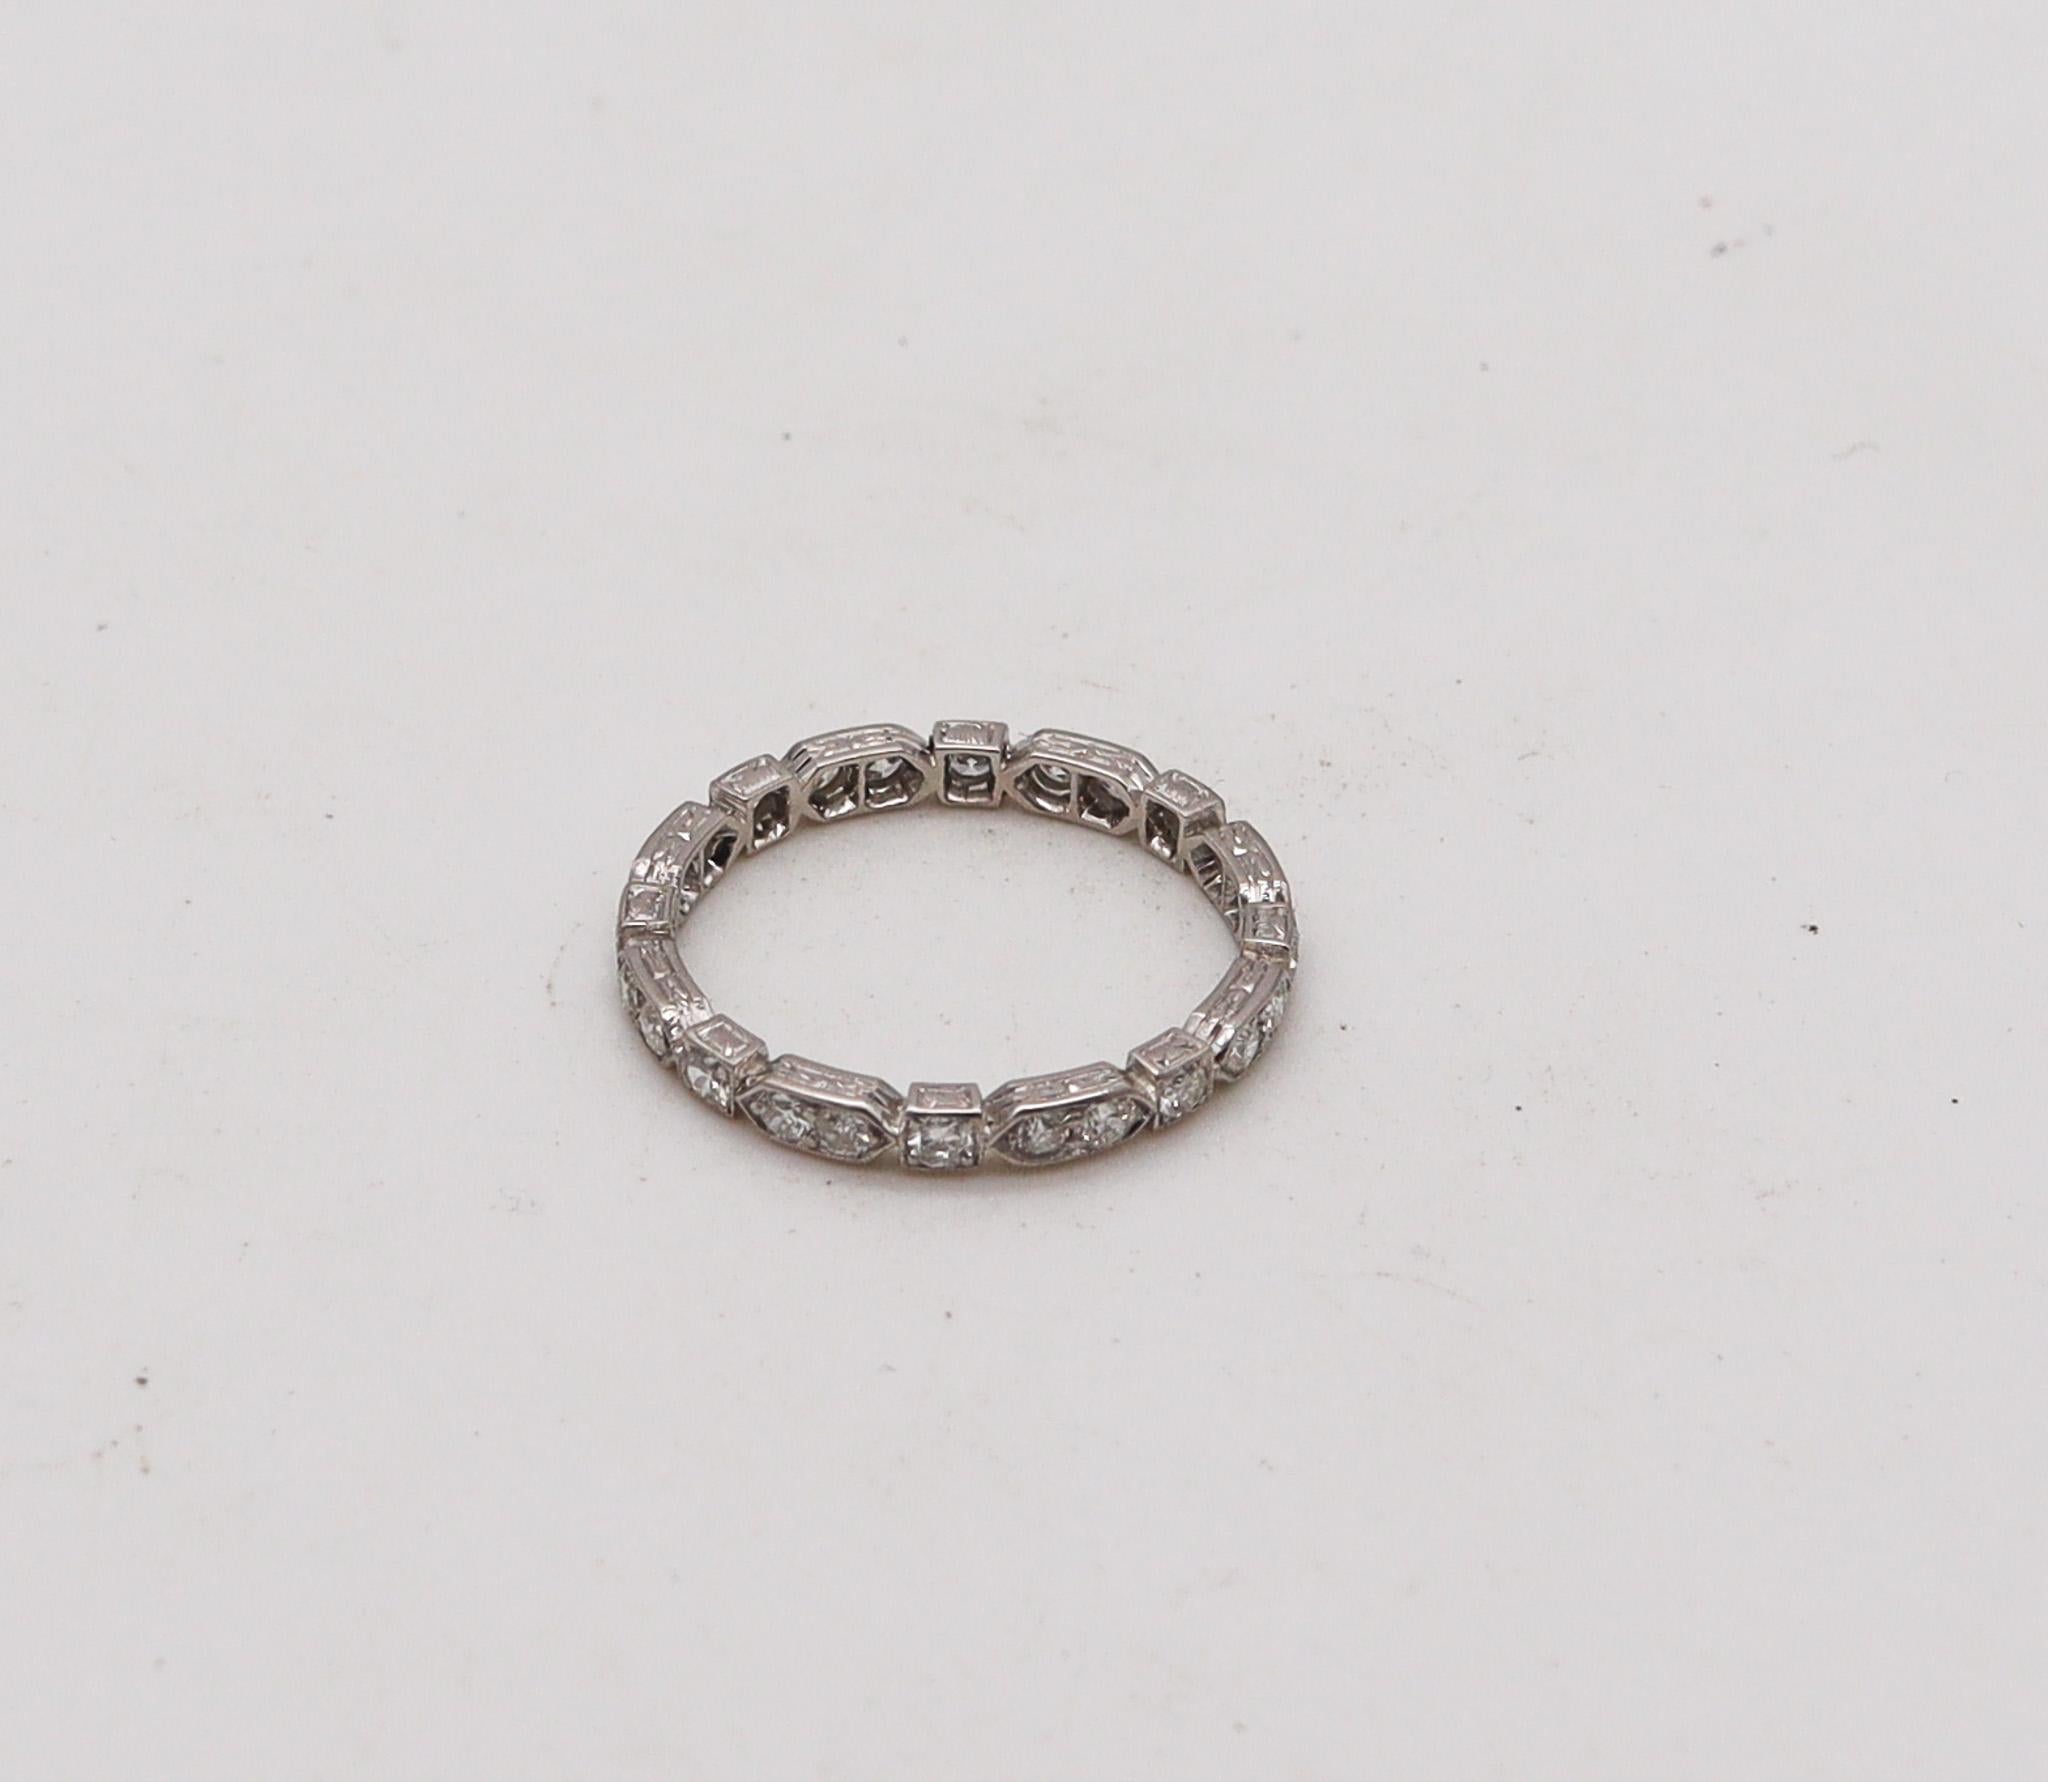 Eternity ring band with diamonds.

Gorgeous and very unusual eternity band ring, created in America during the Art Deco period, back in the 1925. It was crafted in solid .900/.999 platinum with high polished finish and embellished with a great